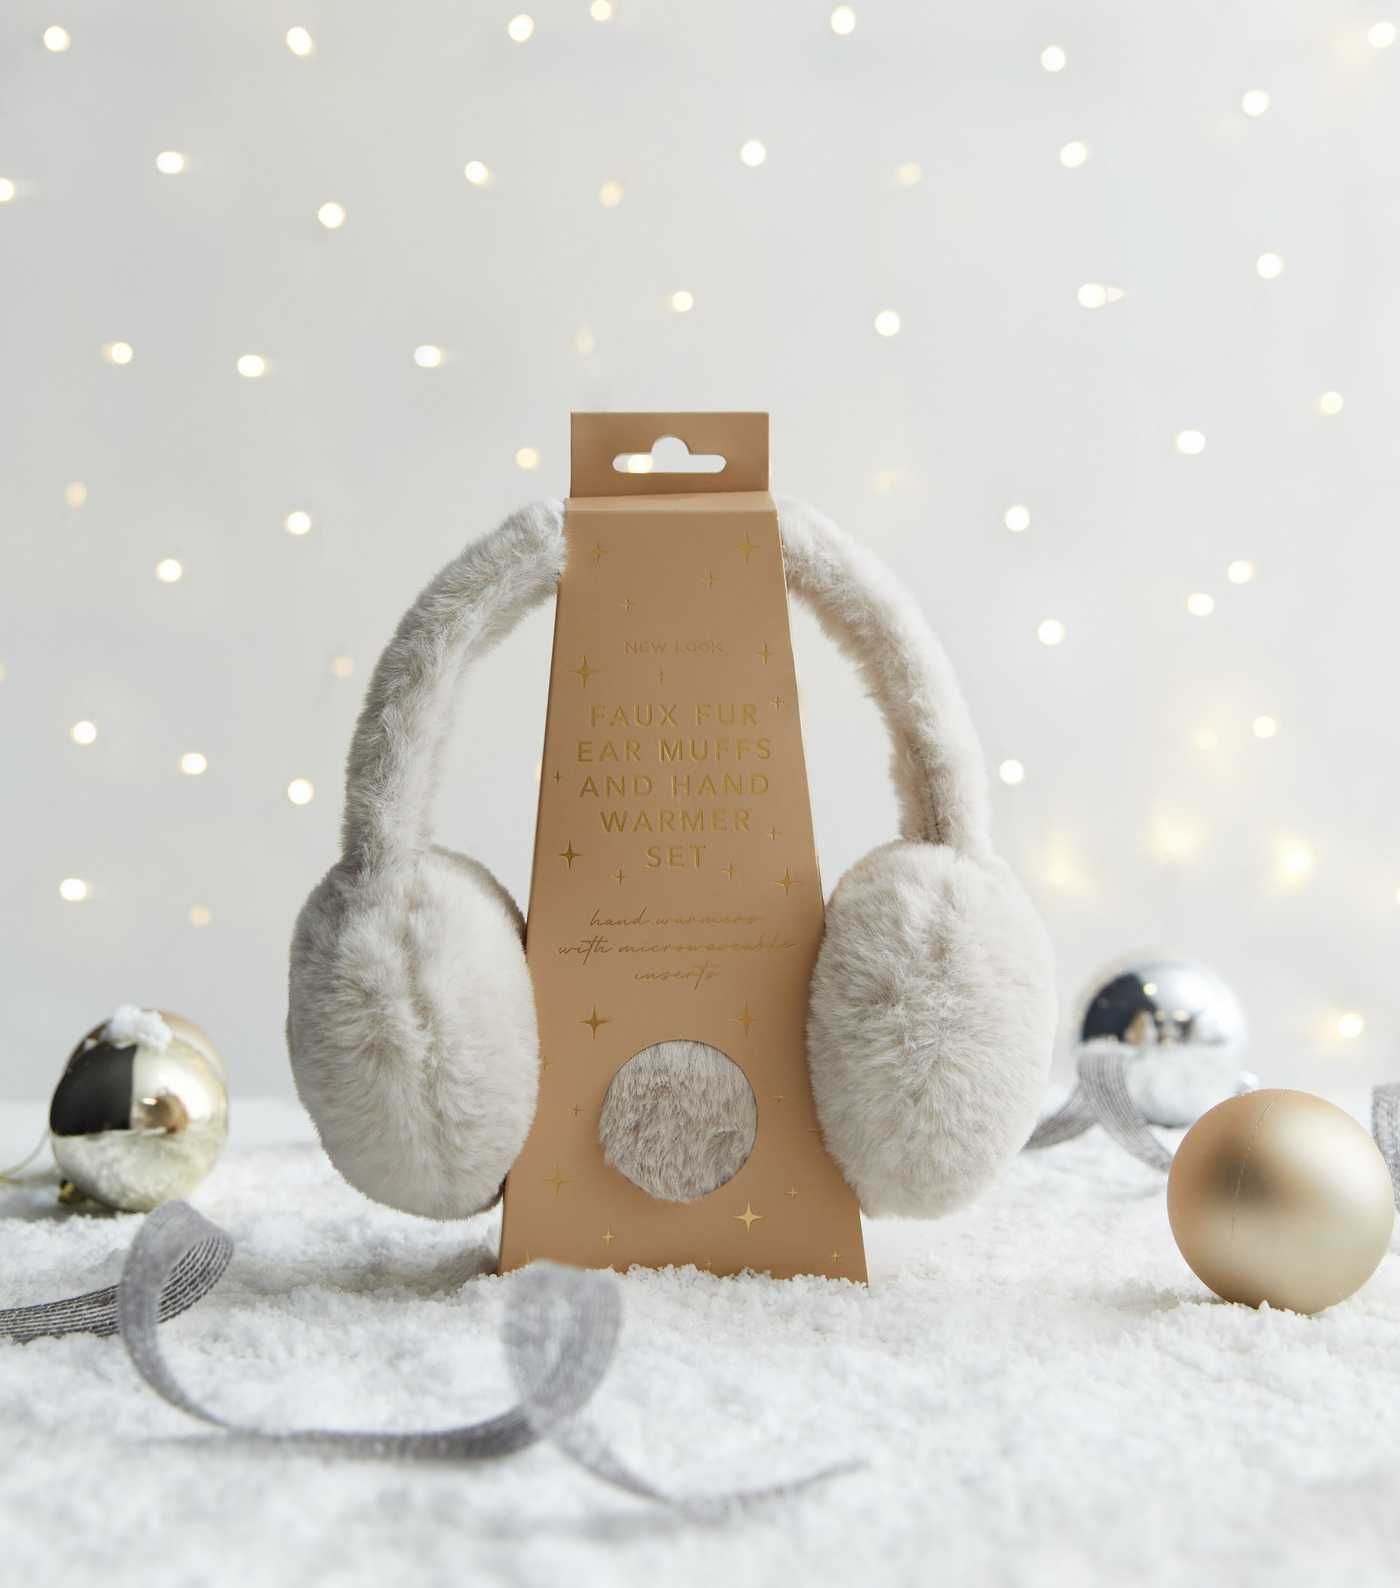 Cream Faux Fur Ear Muffs and Hand Warmer Set | New Look | New Look (UK)